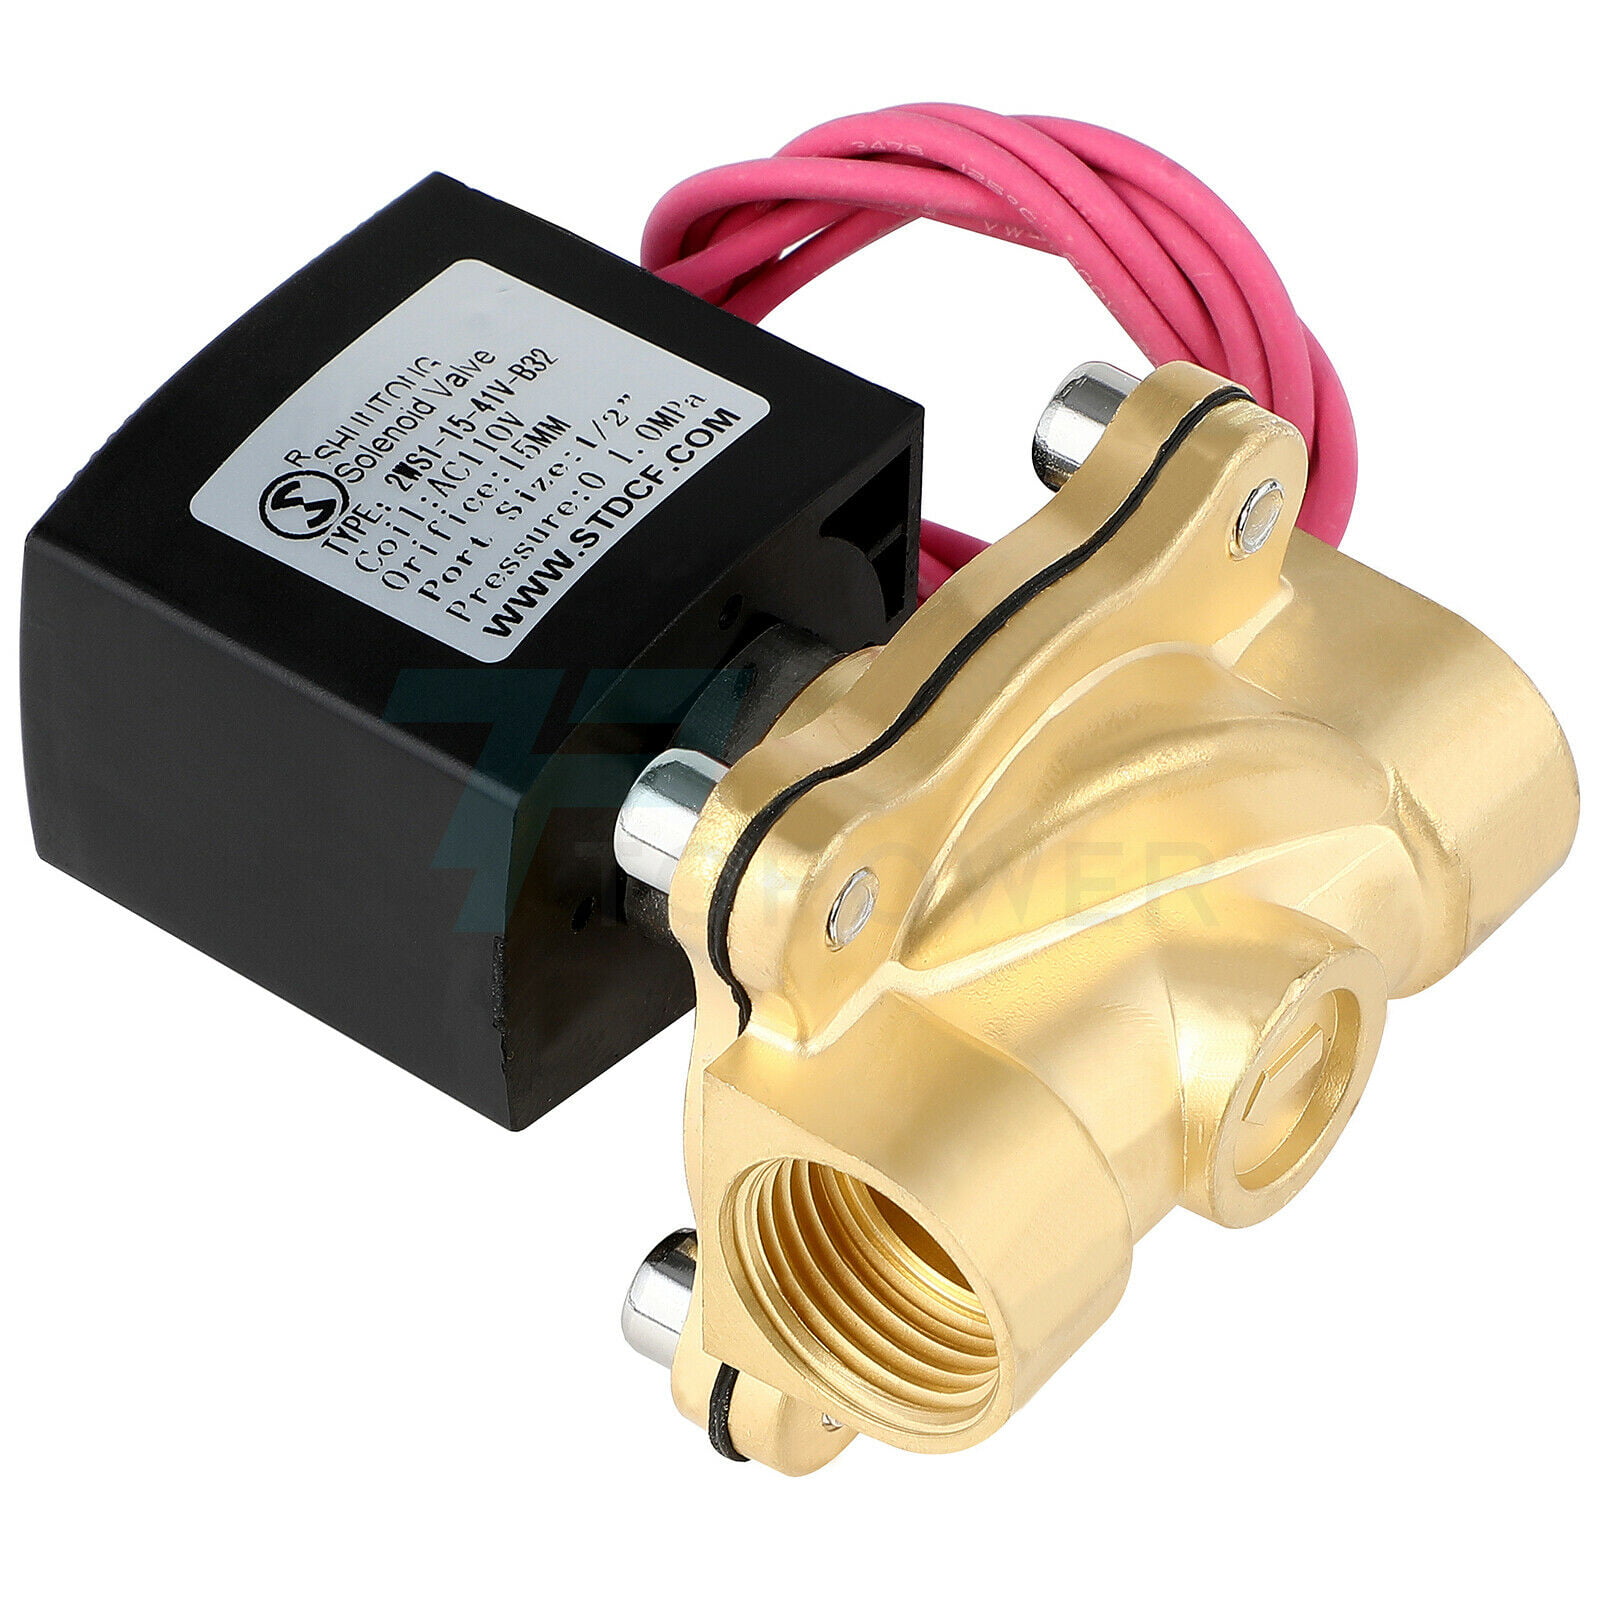 1/2" Half Inch Brass Water Low Power Consumption Electric Solenoid Valve 110V AC 